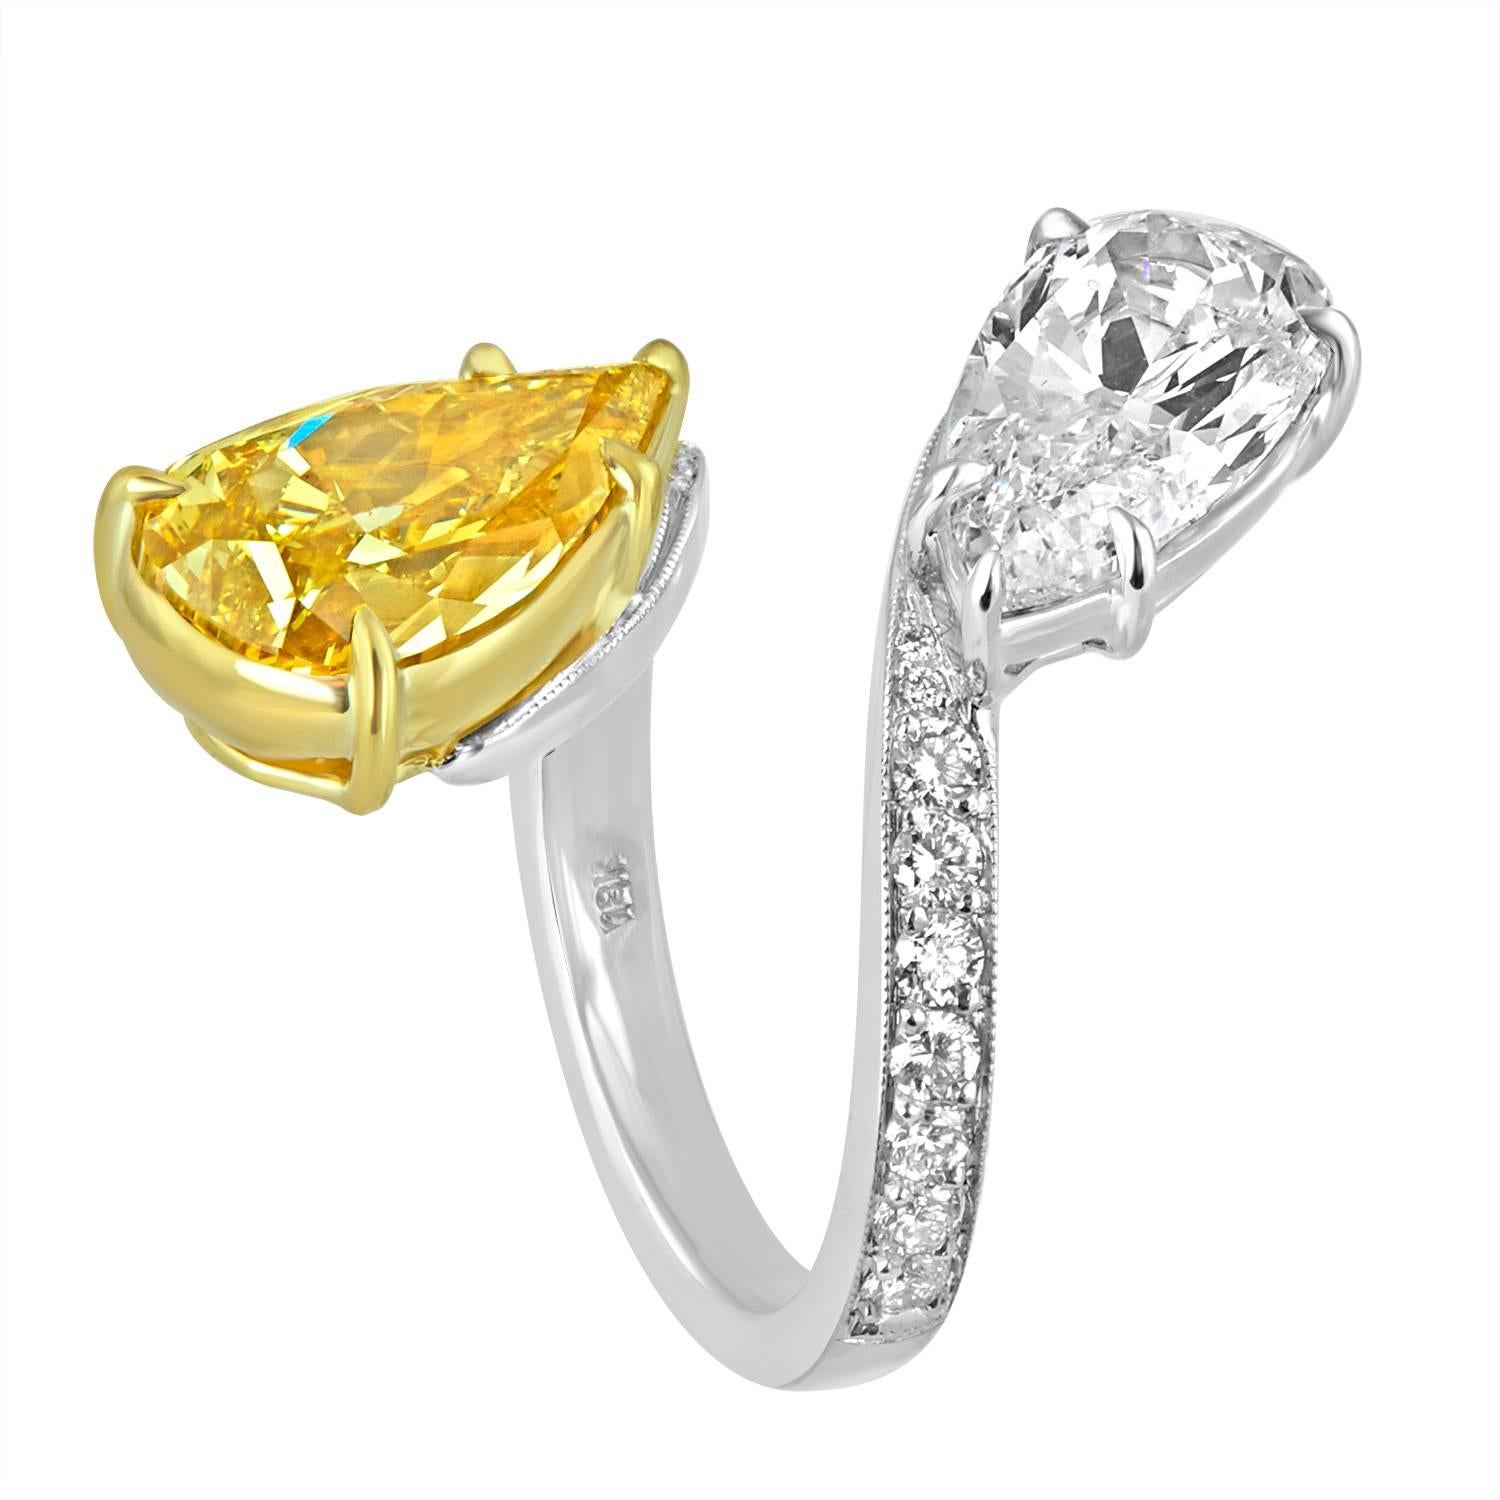 A unique bypass ring created to impress. The 4.06 Carat Pear Shape is GIA certified as Fancy Brownish Yellow in Color and SI1 in Clarity and the White Diamond is a beautiful 3.02 Carat Pear Shape. Both diamonds are mounted in 18K White Gold and 18K